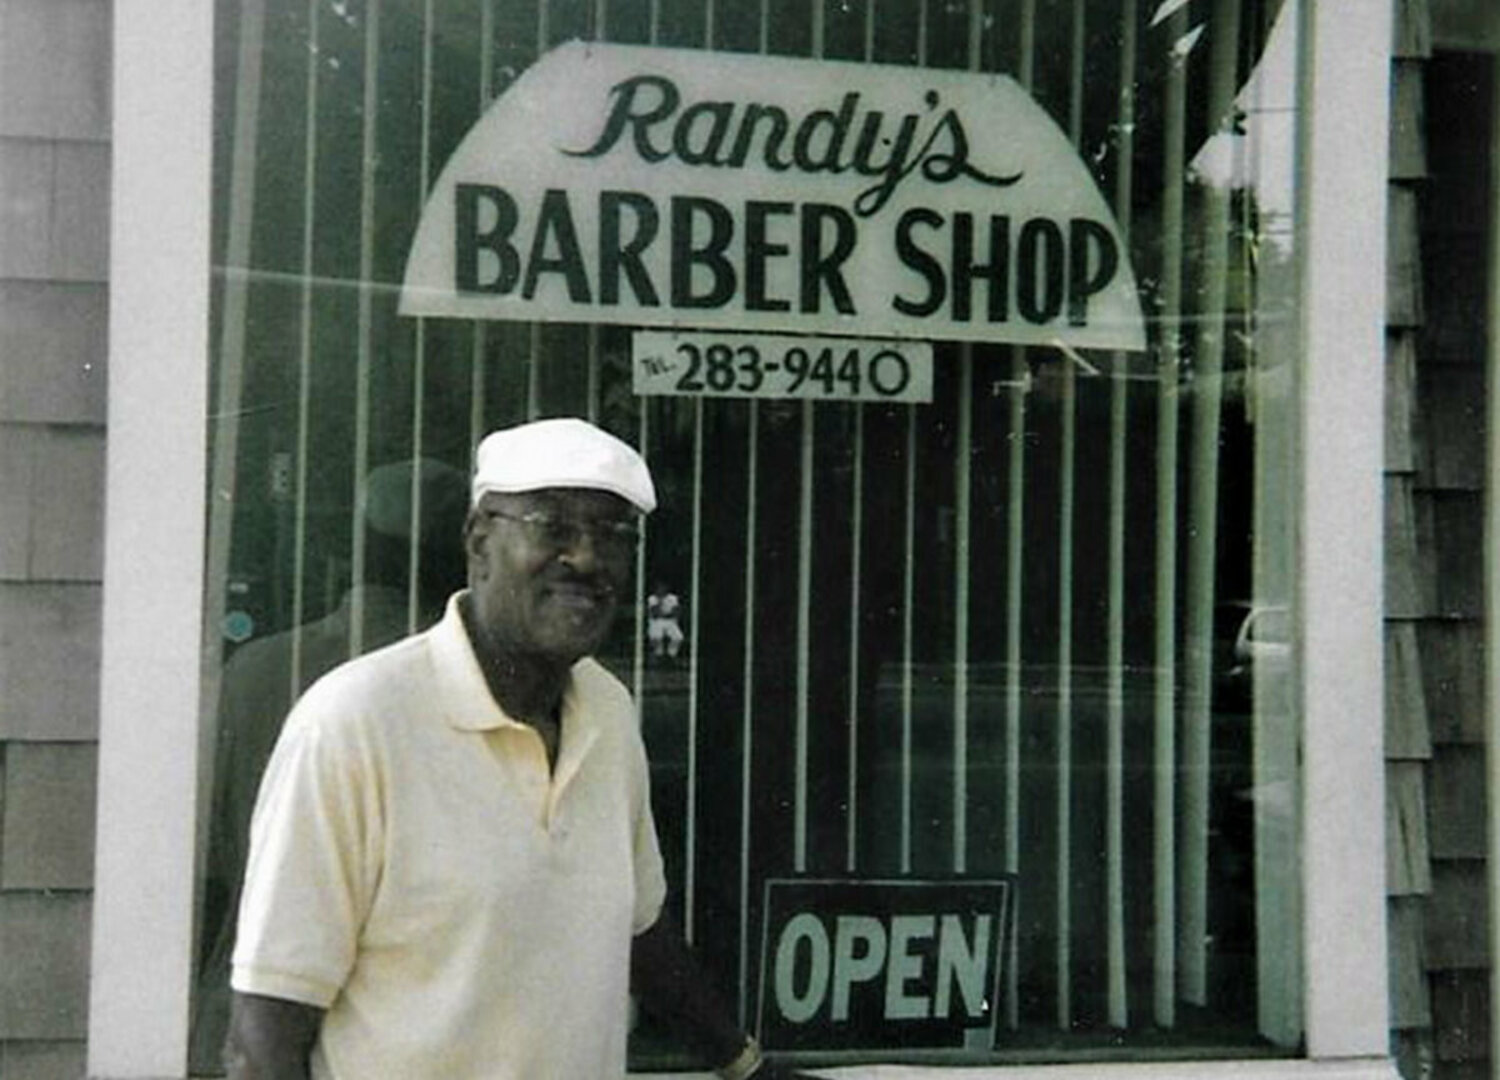 Randy's Barber Shop in Southampton Village was an important part of the local Black community.  Simmons helped save the building from being razed, and it is now the home of the Southampton African American Museum.